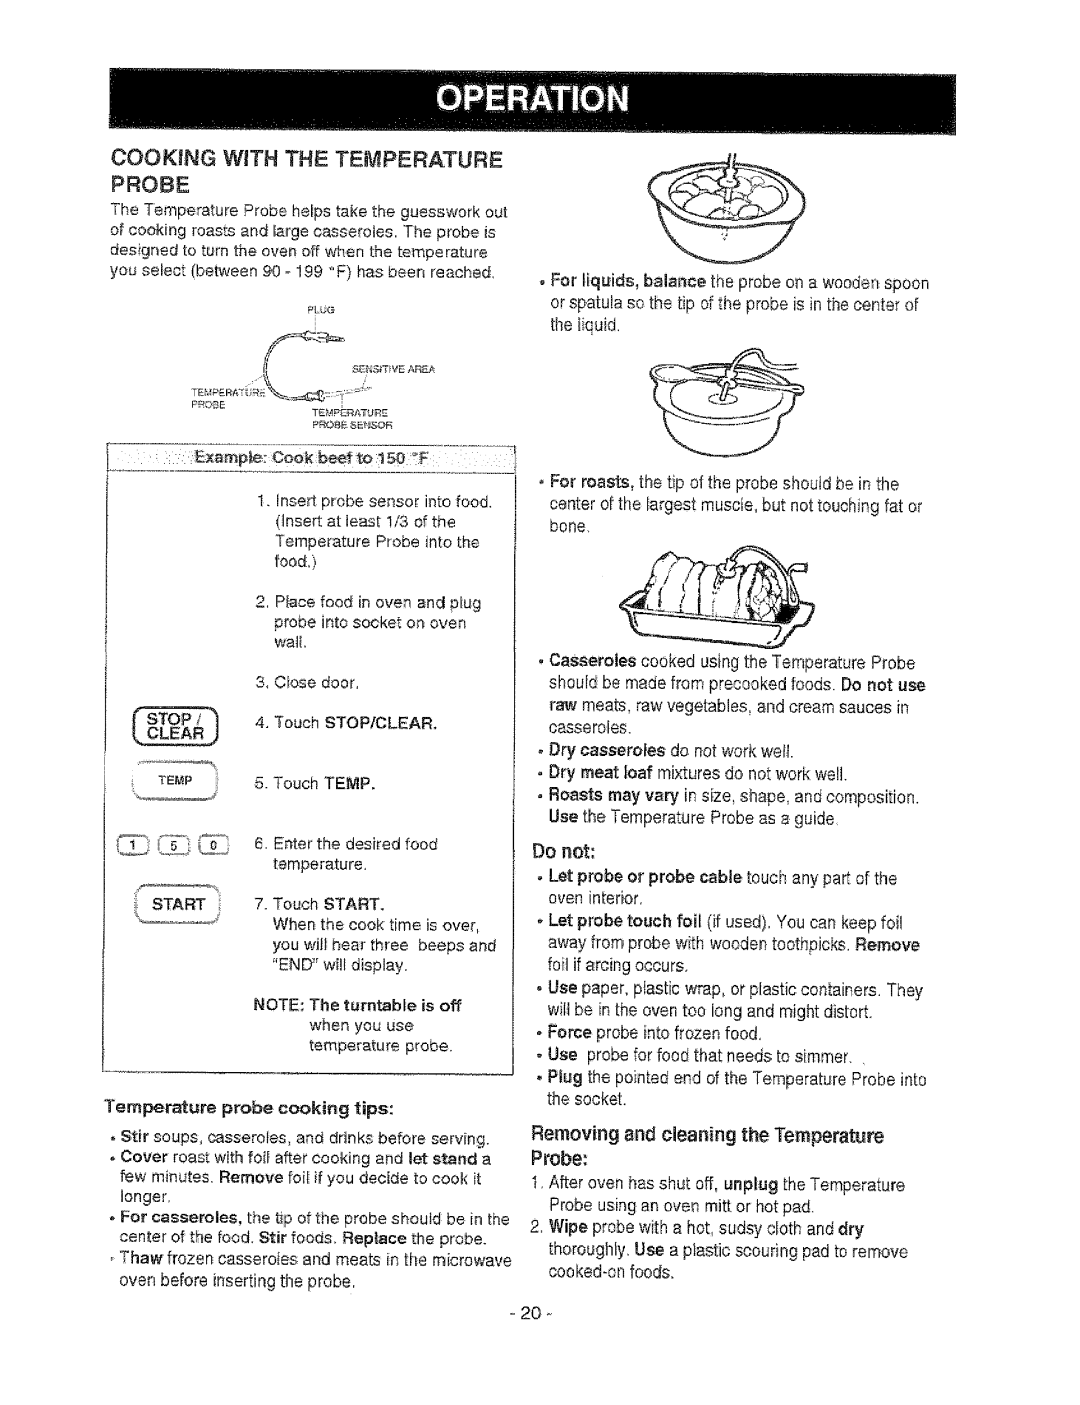 Sears 721.67602, 721.67601 owner manual Cooking With The Temperature Probe, Touch STOP/CLEAR, Temperature probe cooking tips 